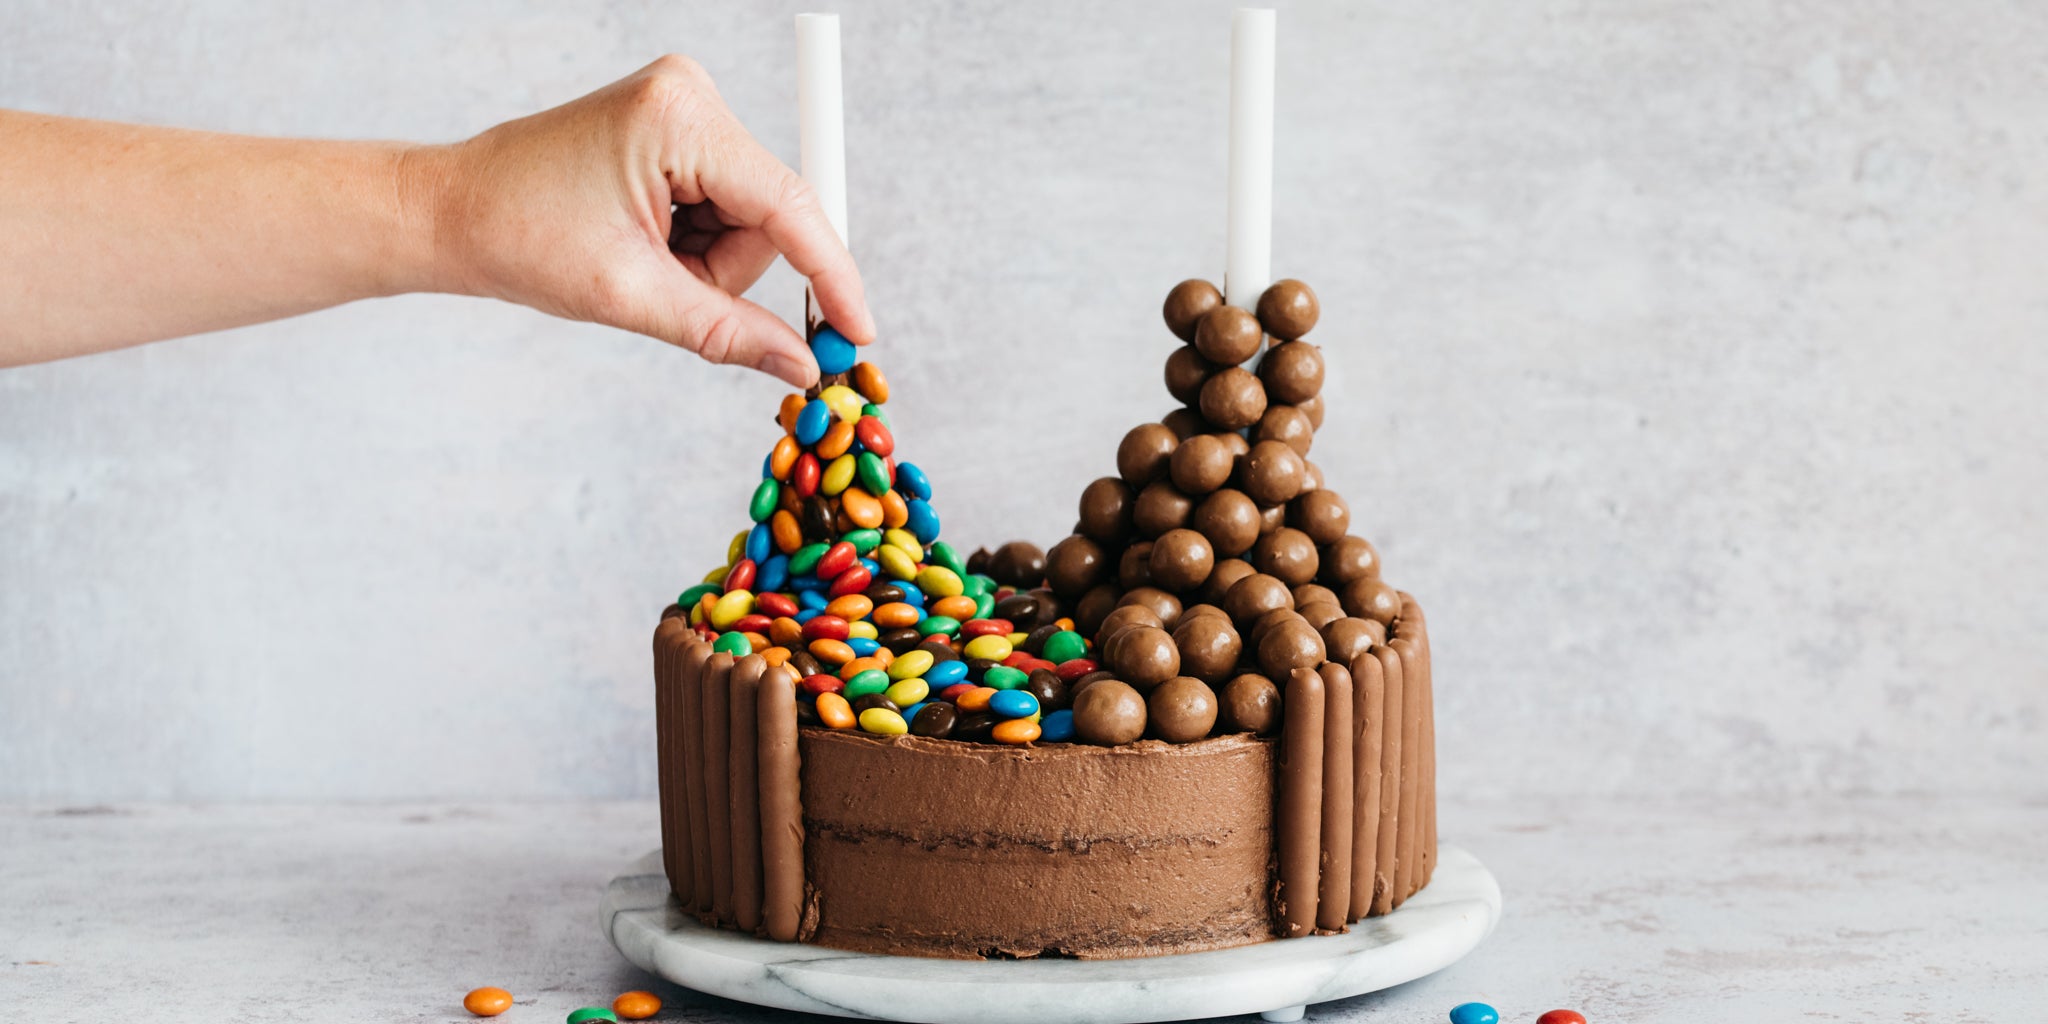 Chocolate Showstopper Cake being hand decorated with M&M's and Maltesers on dole rods